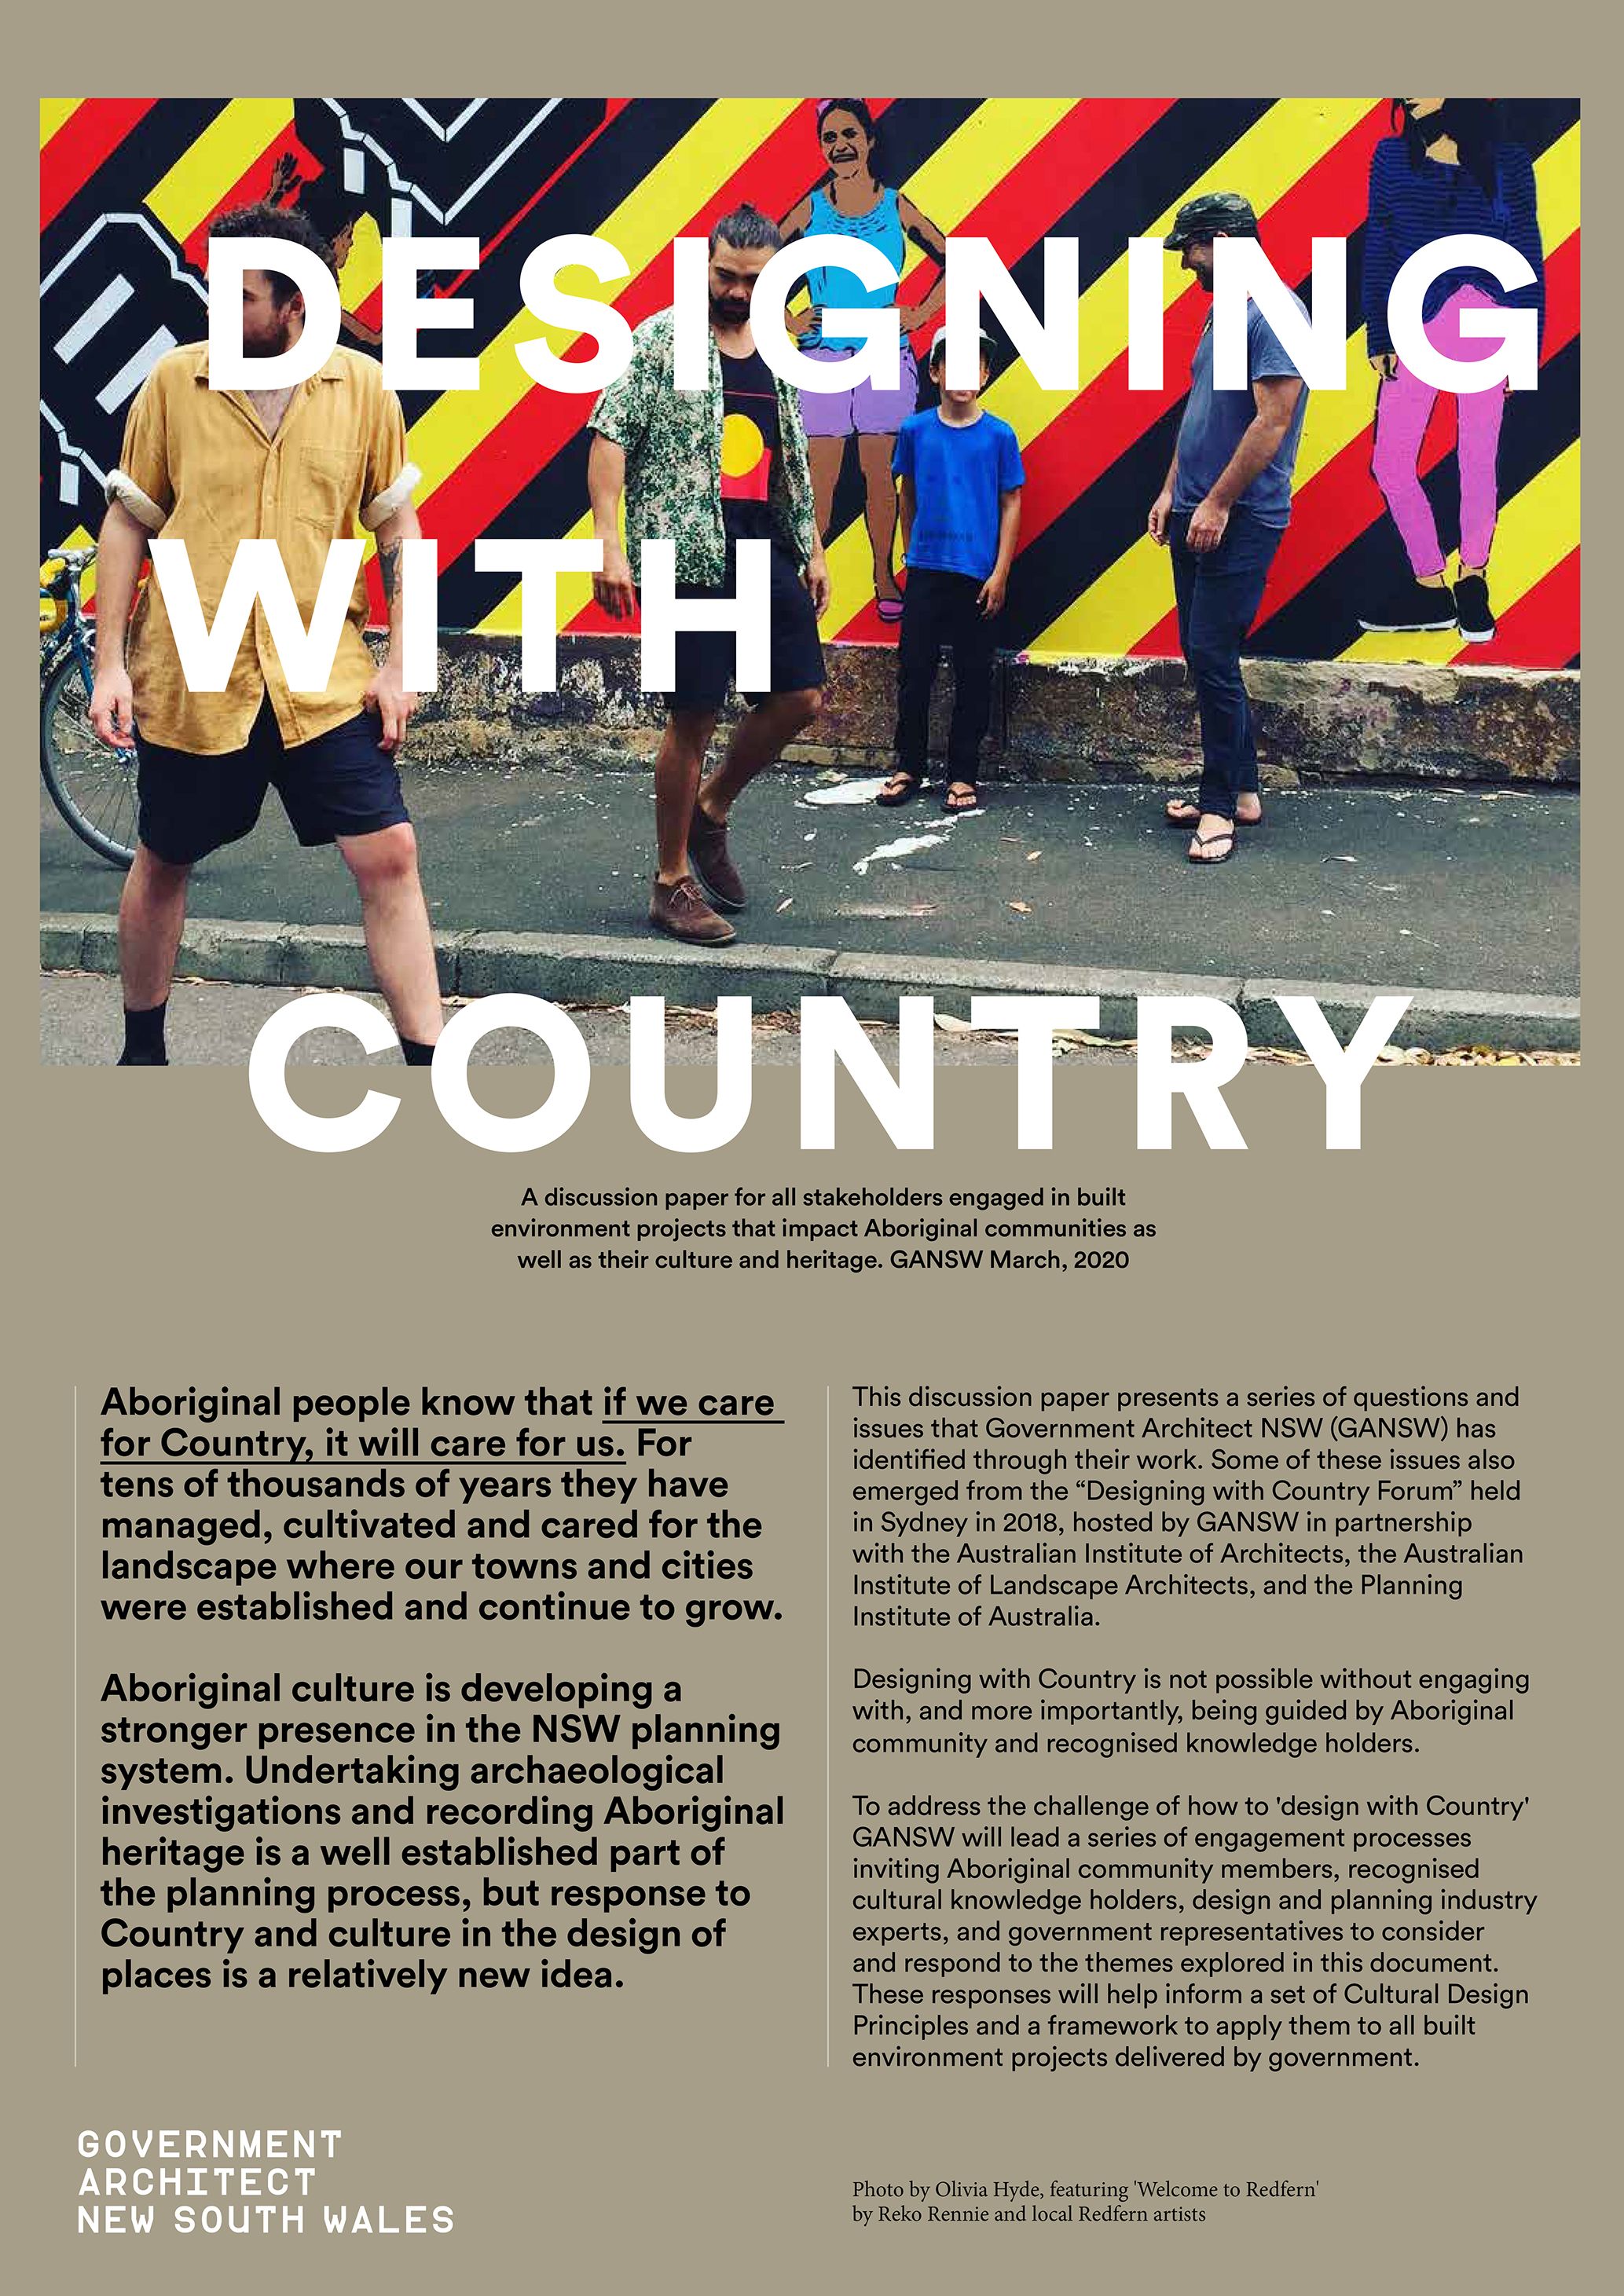 A report with a half page image of a wall mural of red, yellow and black stripes four people walking along the street, one who is wearing a t-shirt with the Aboriginal flag on it. The words 'designing with country' site over the image in white text